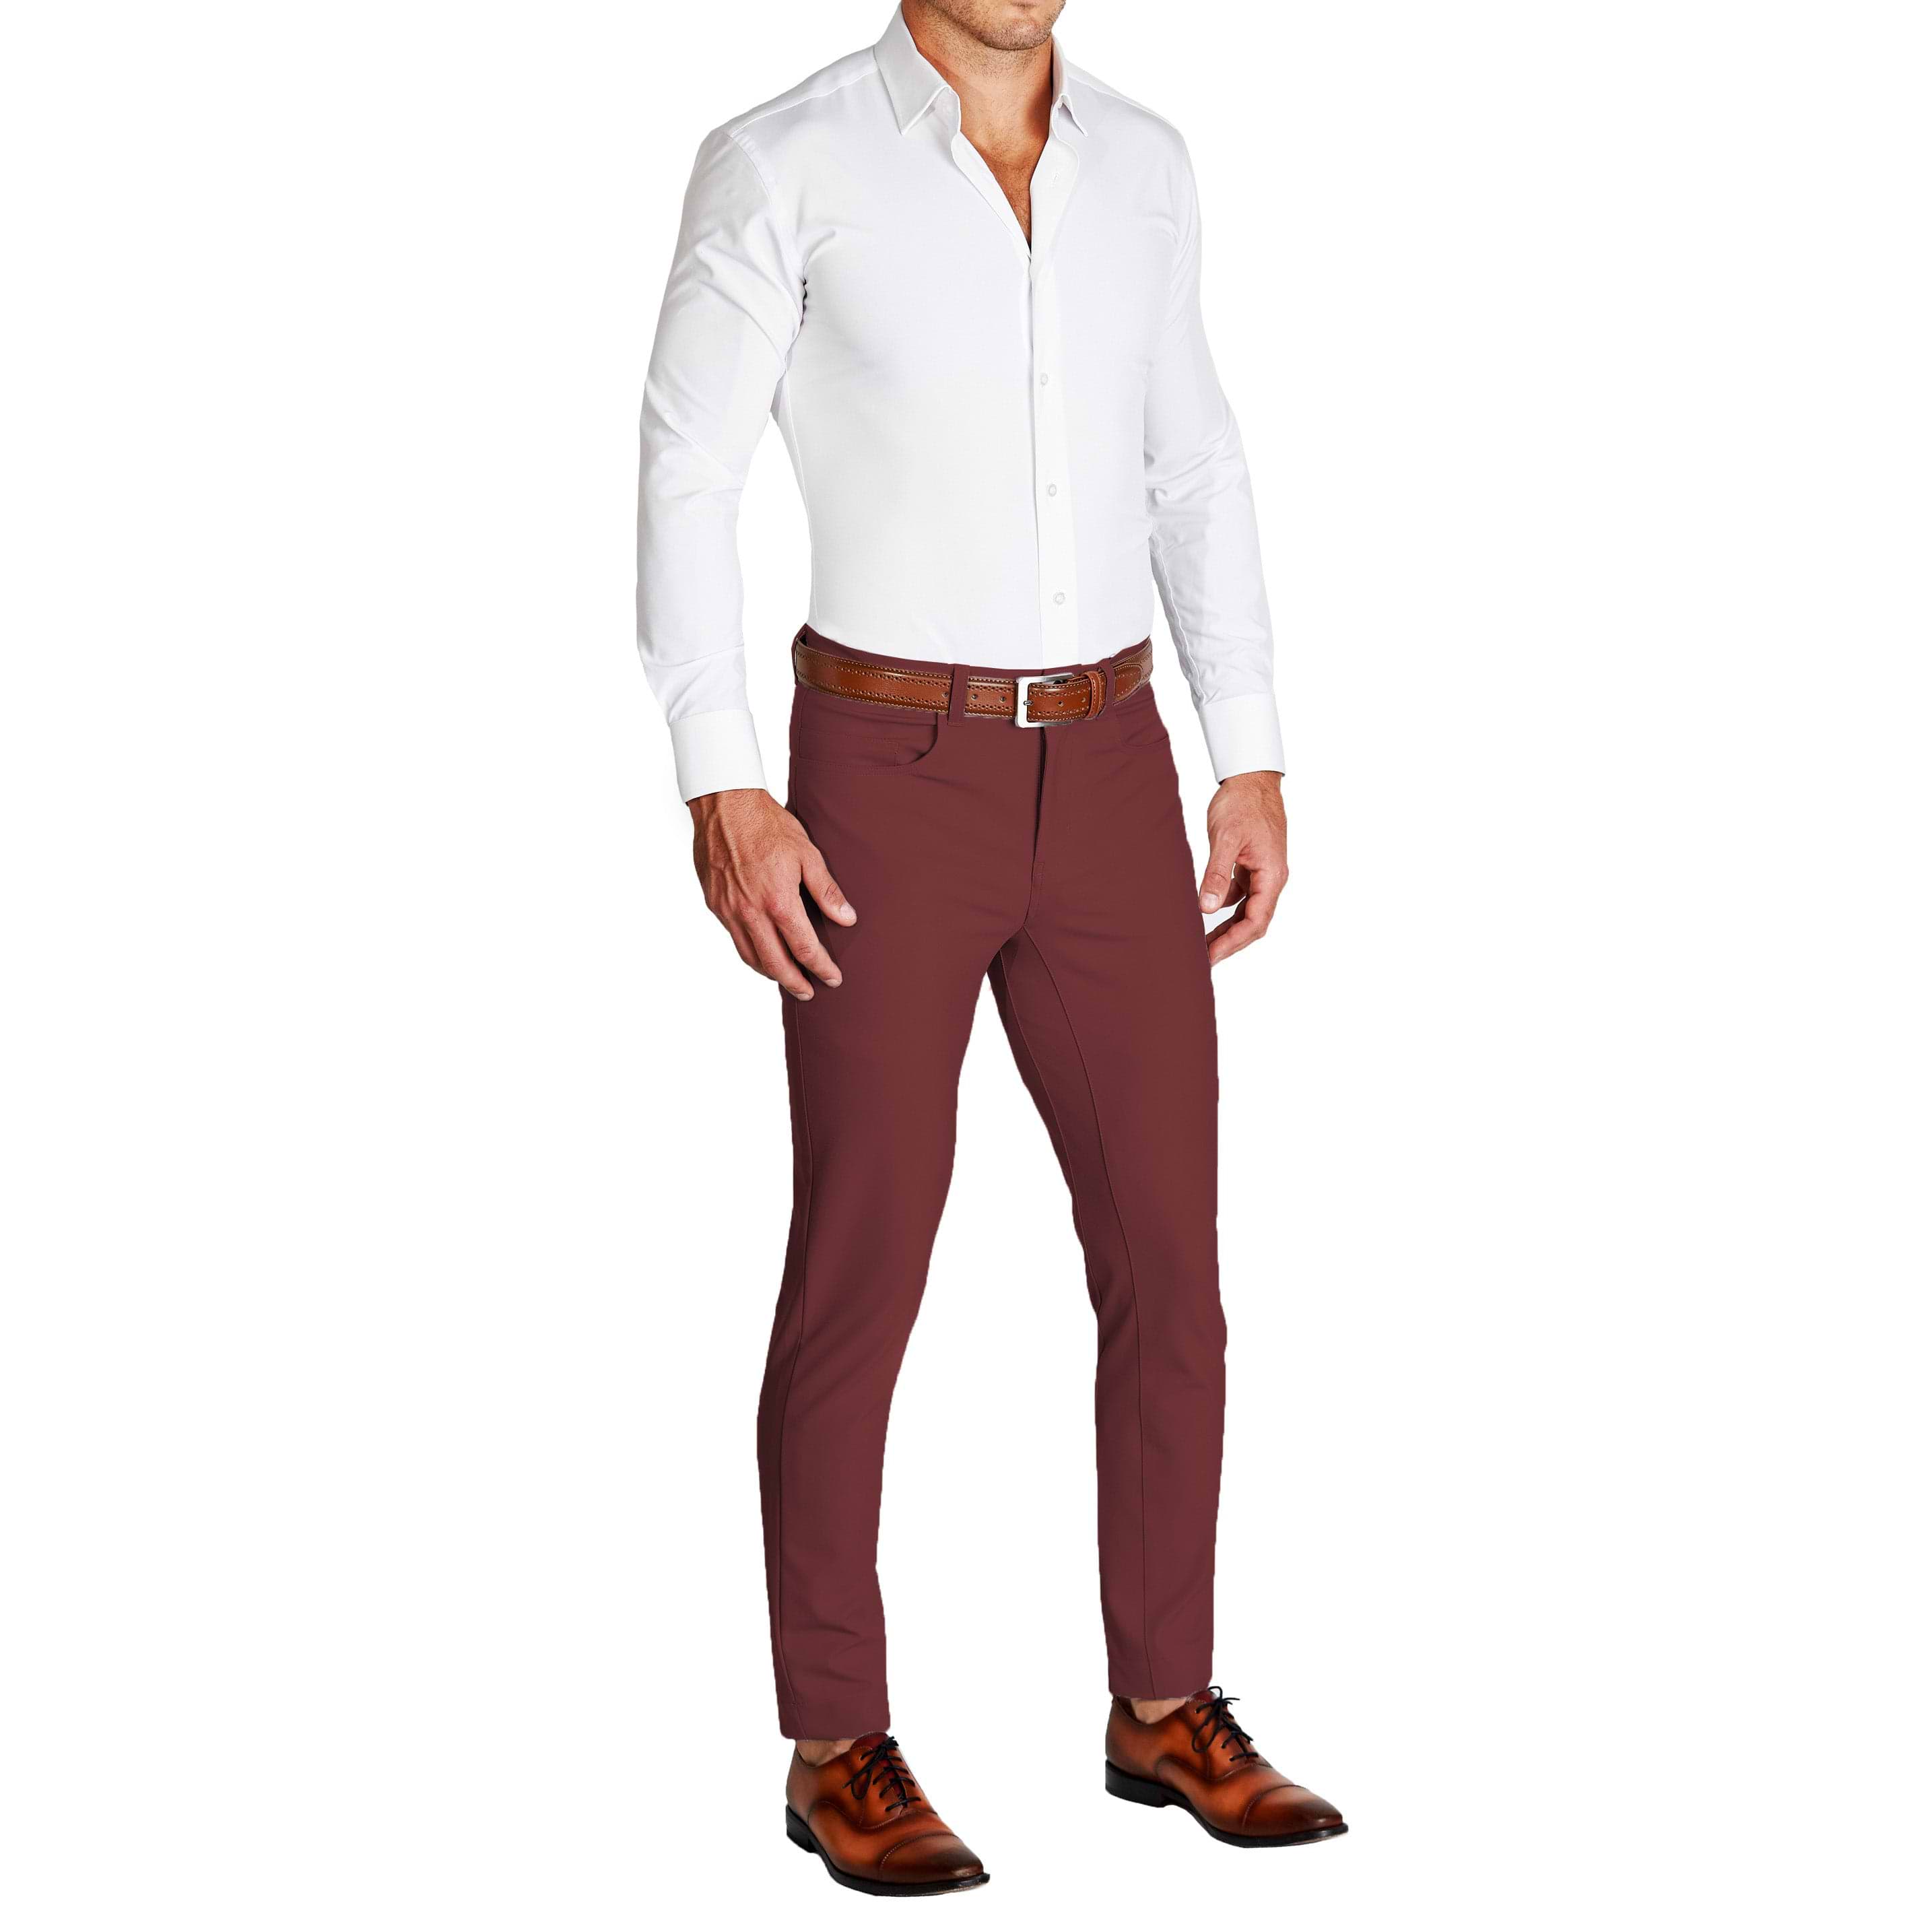 Light Blue Long Sleeve Shirt with Burgundy Pants Outfits For Men (15 ideas  & outfits) | Lookastic